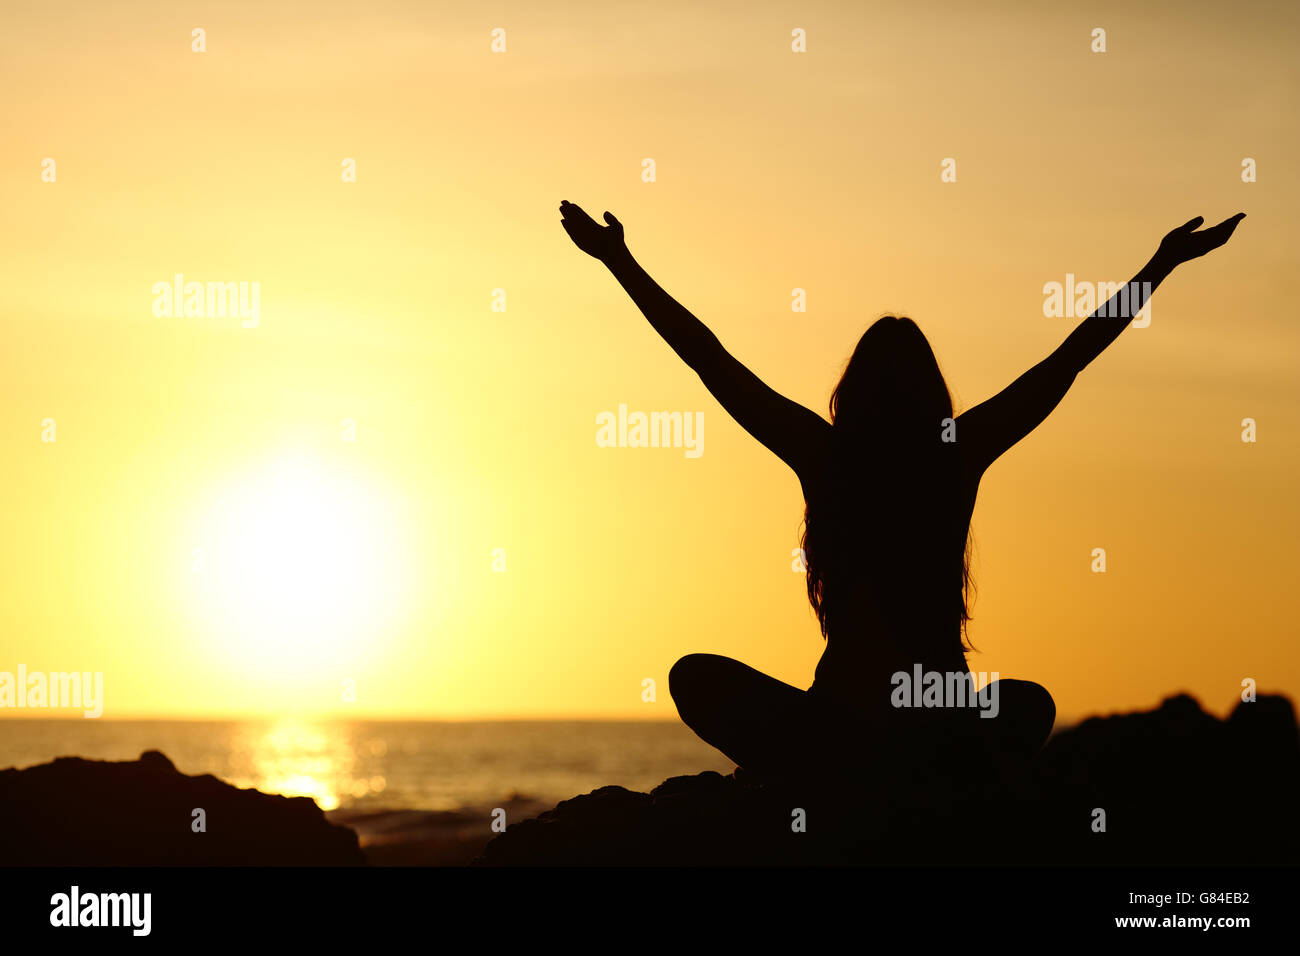 Back view portrait silhouette of a happy woman raising arms in a new day looking at warm sun at sunrise Stock Photo